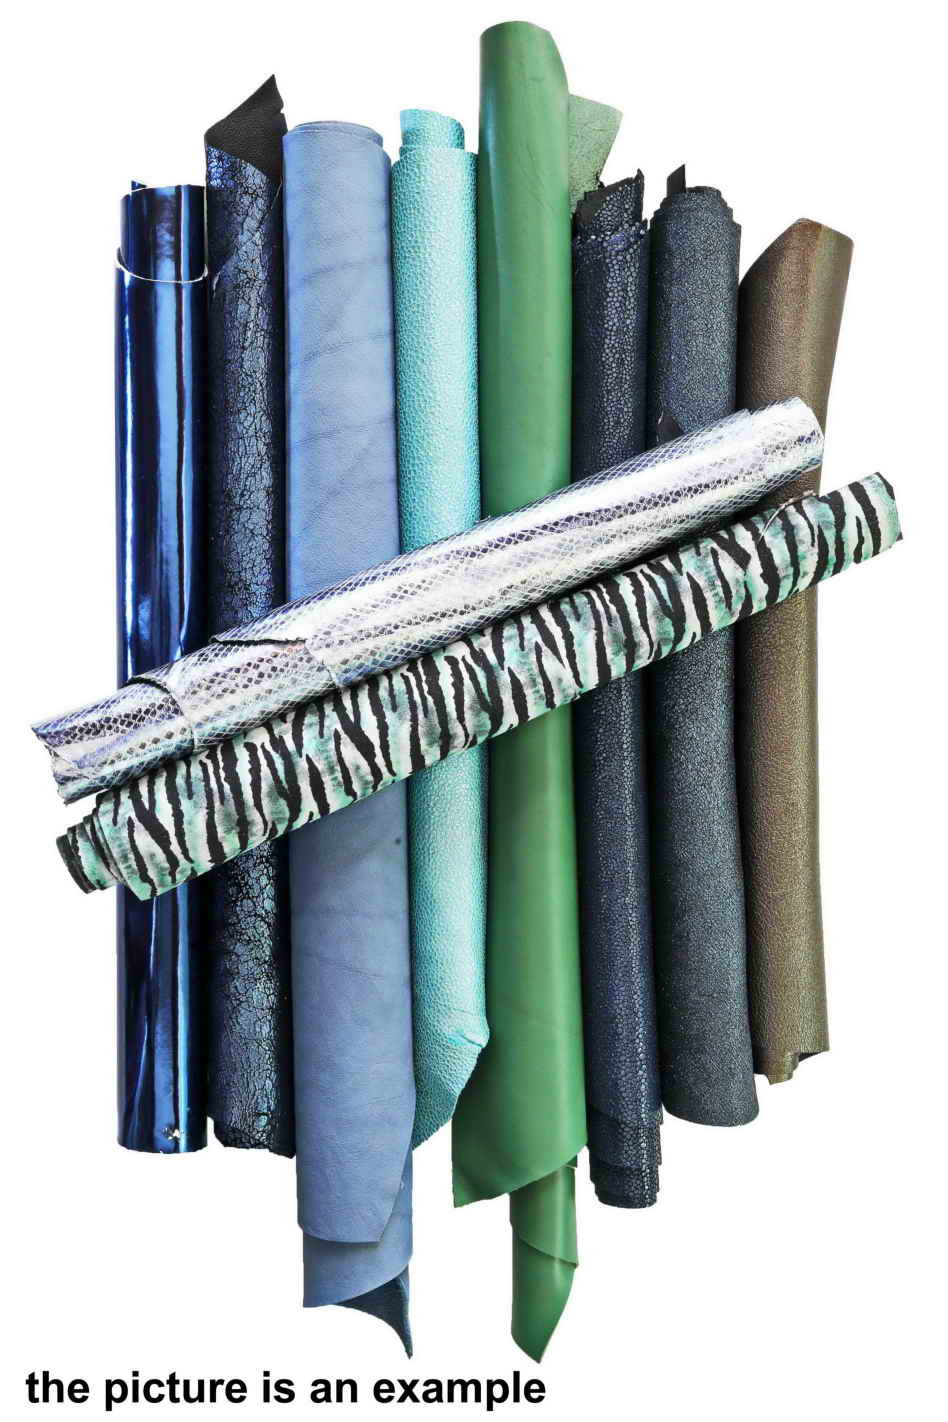 Mix leather scraps - GREEN and BLUE - fancy textures, foils and